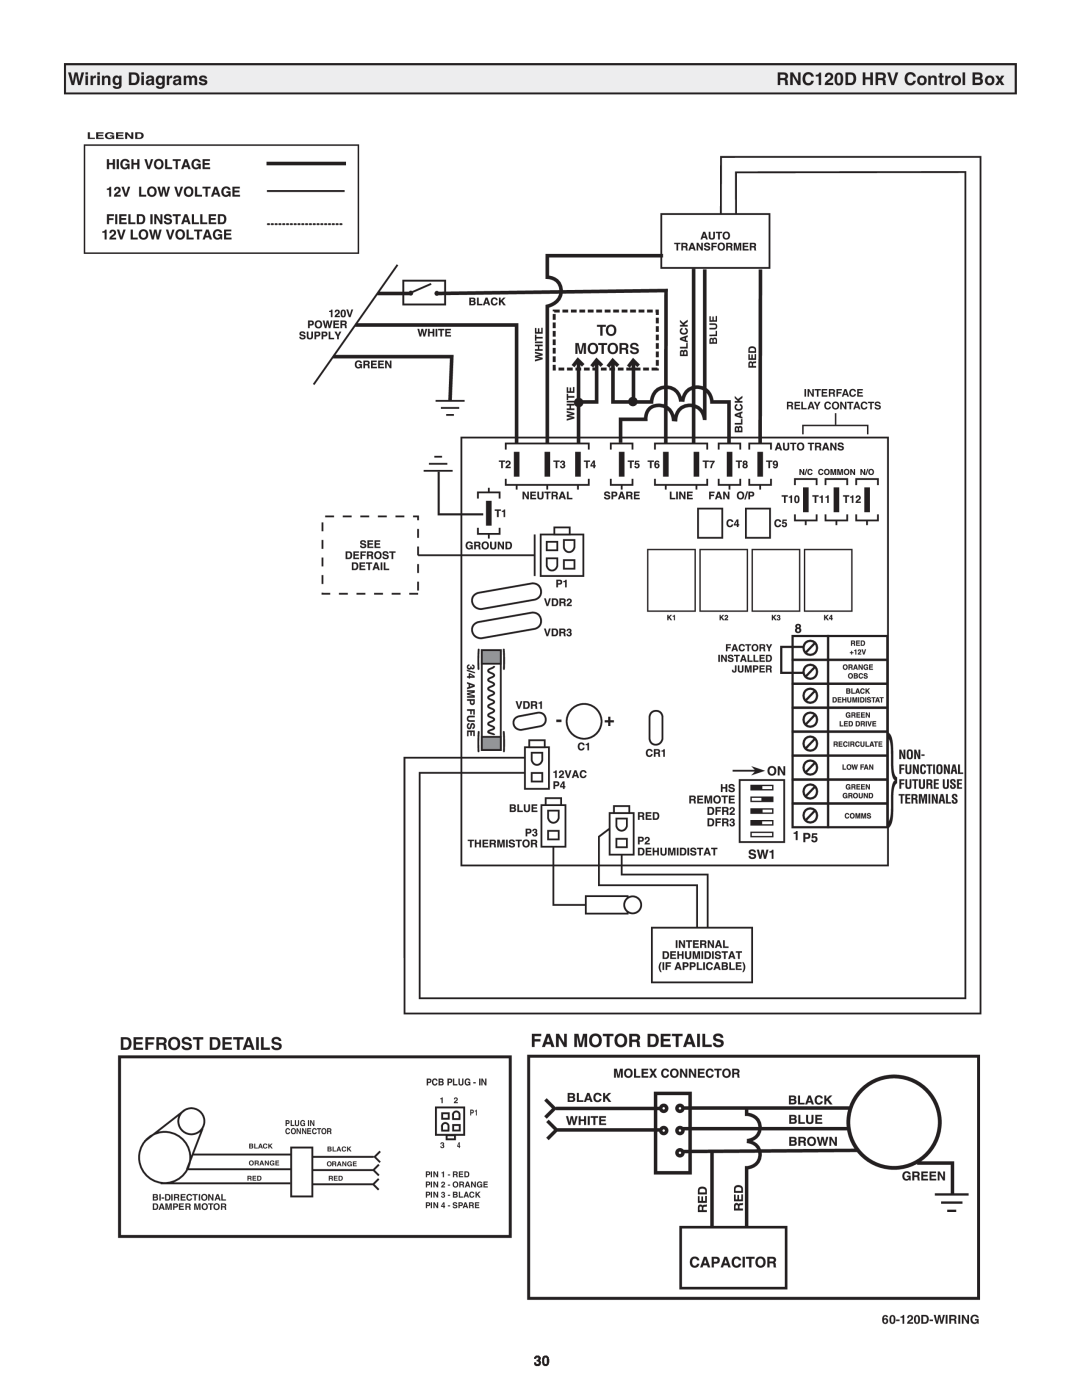 Lifebreath RNC10, RNC5-TPD, RNC200, RNC95 manual Wiring Diagrams, RNC120D HRV Control Box, Defrost Details, Plug In Connector 